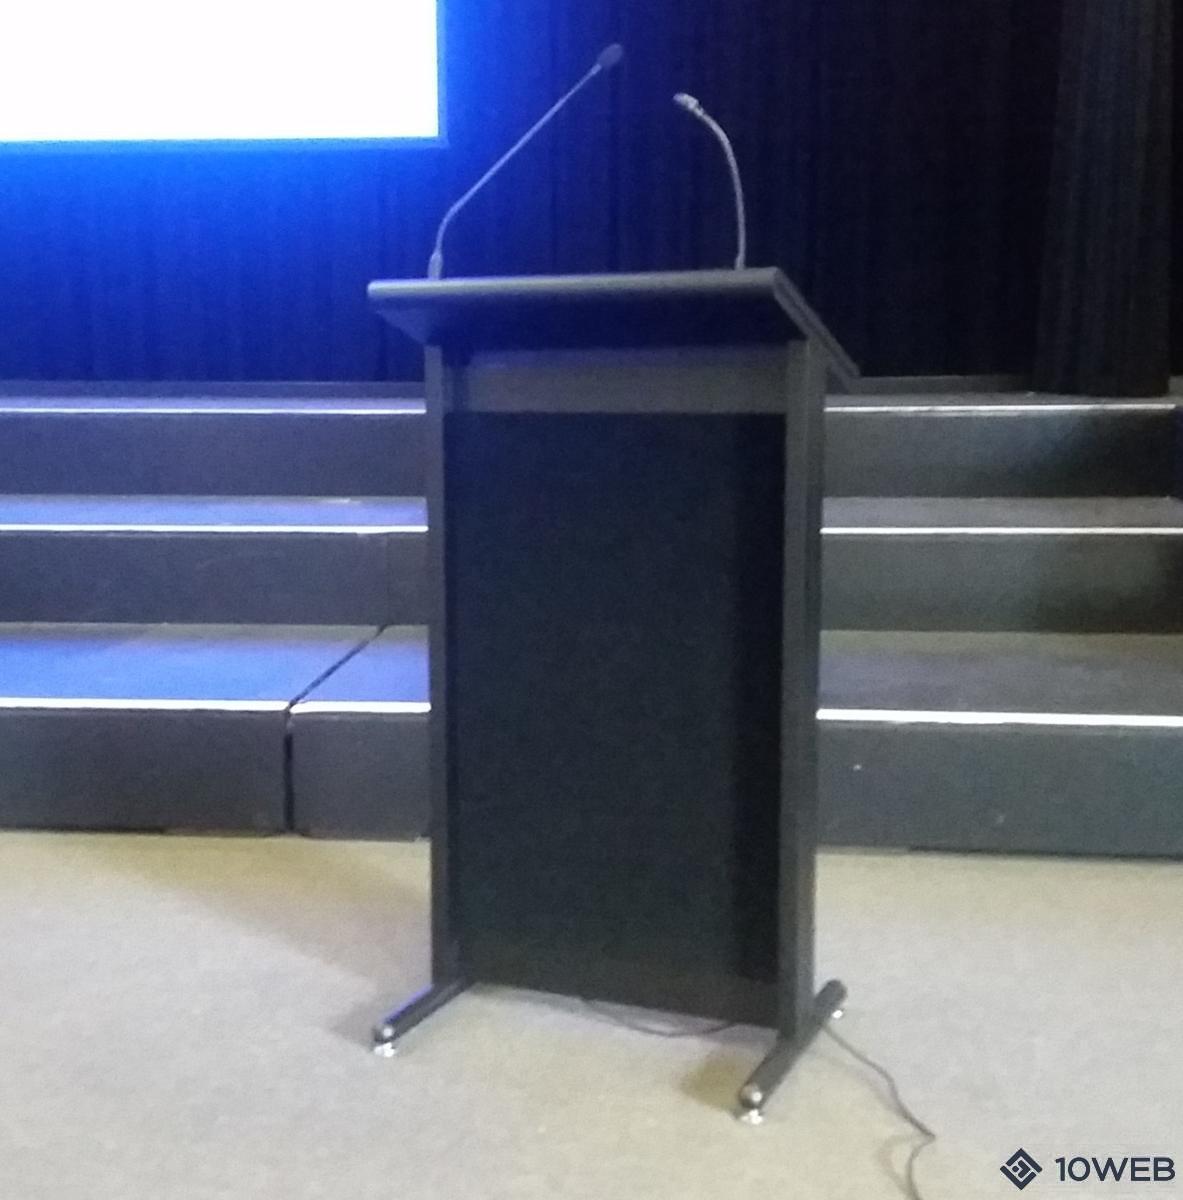 Lectrum L20S lectern with a Beyer Gooseneck Microphone at Balwyn Primary